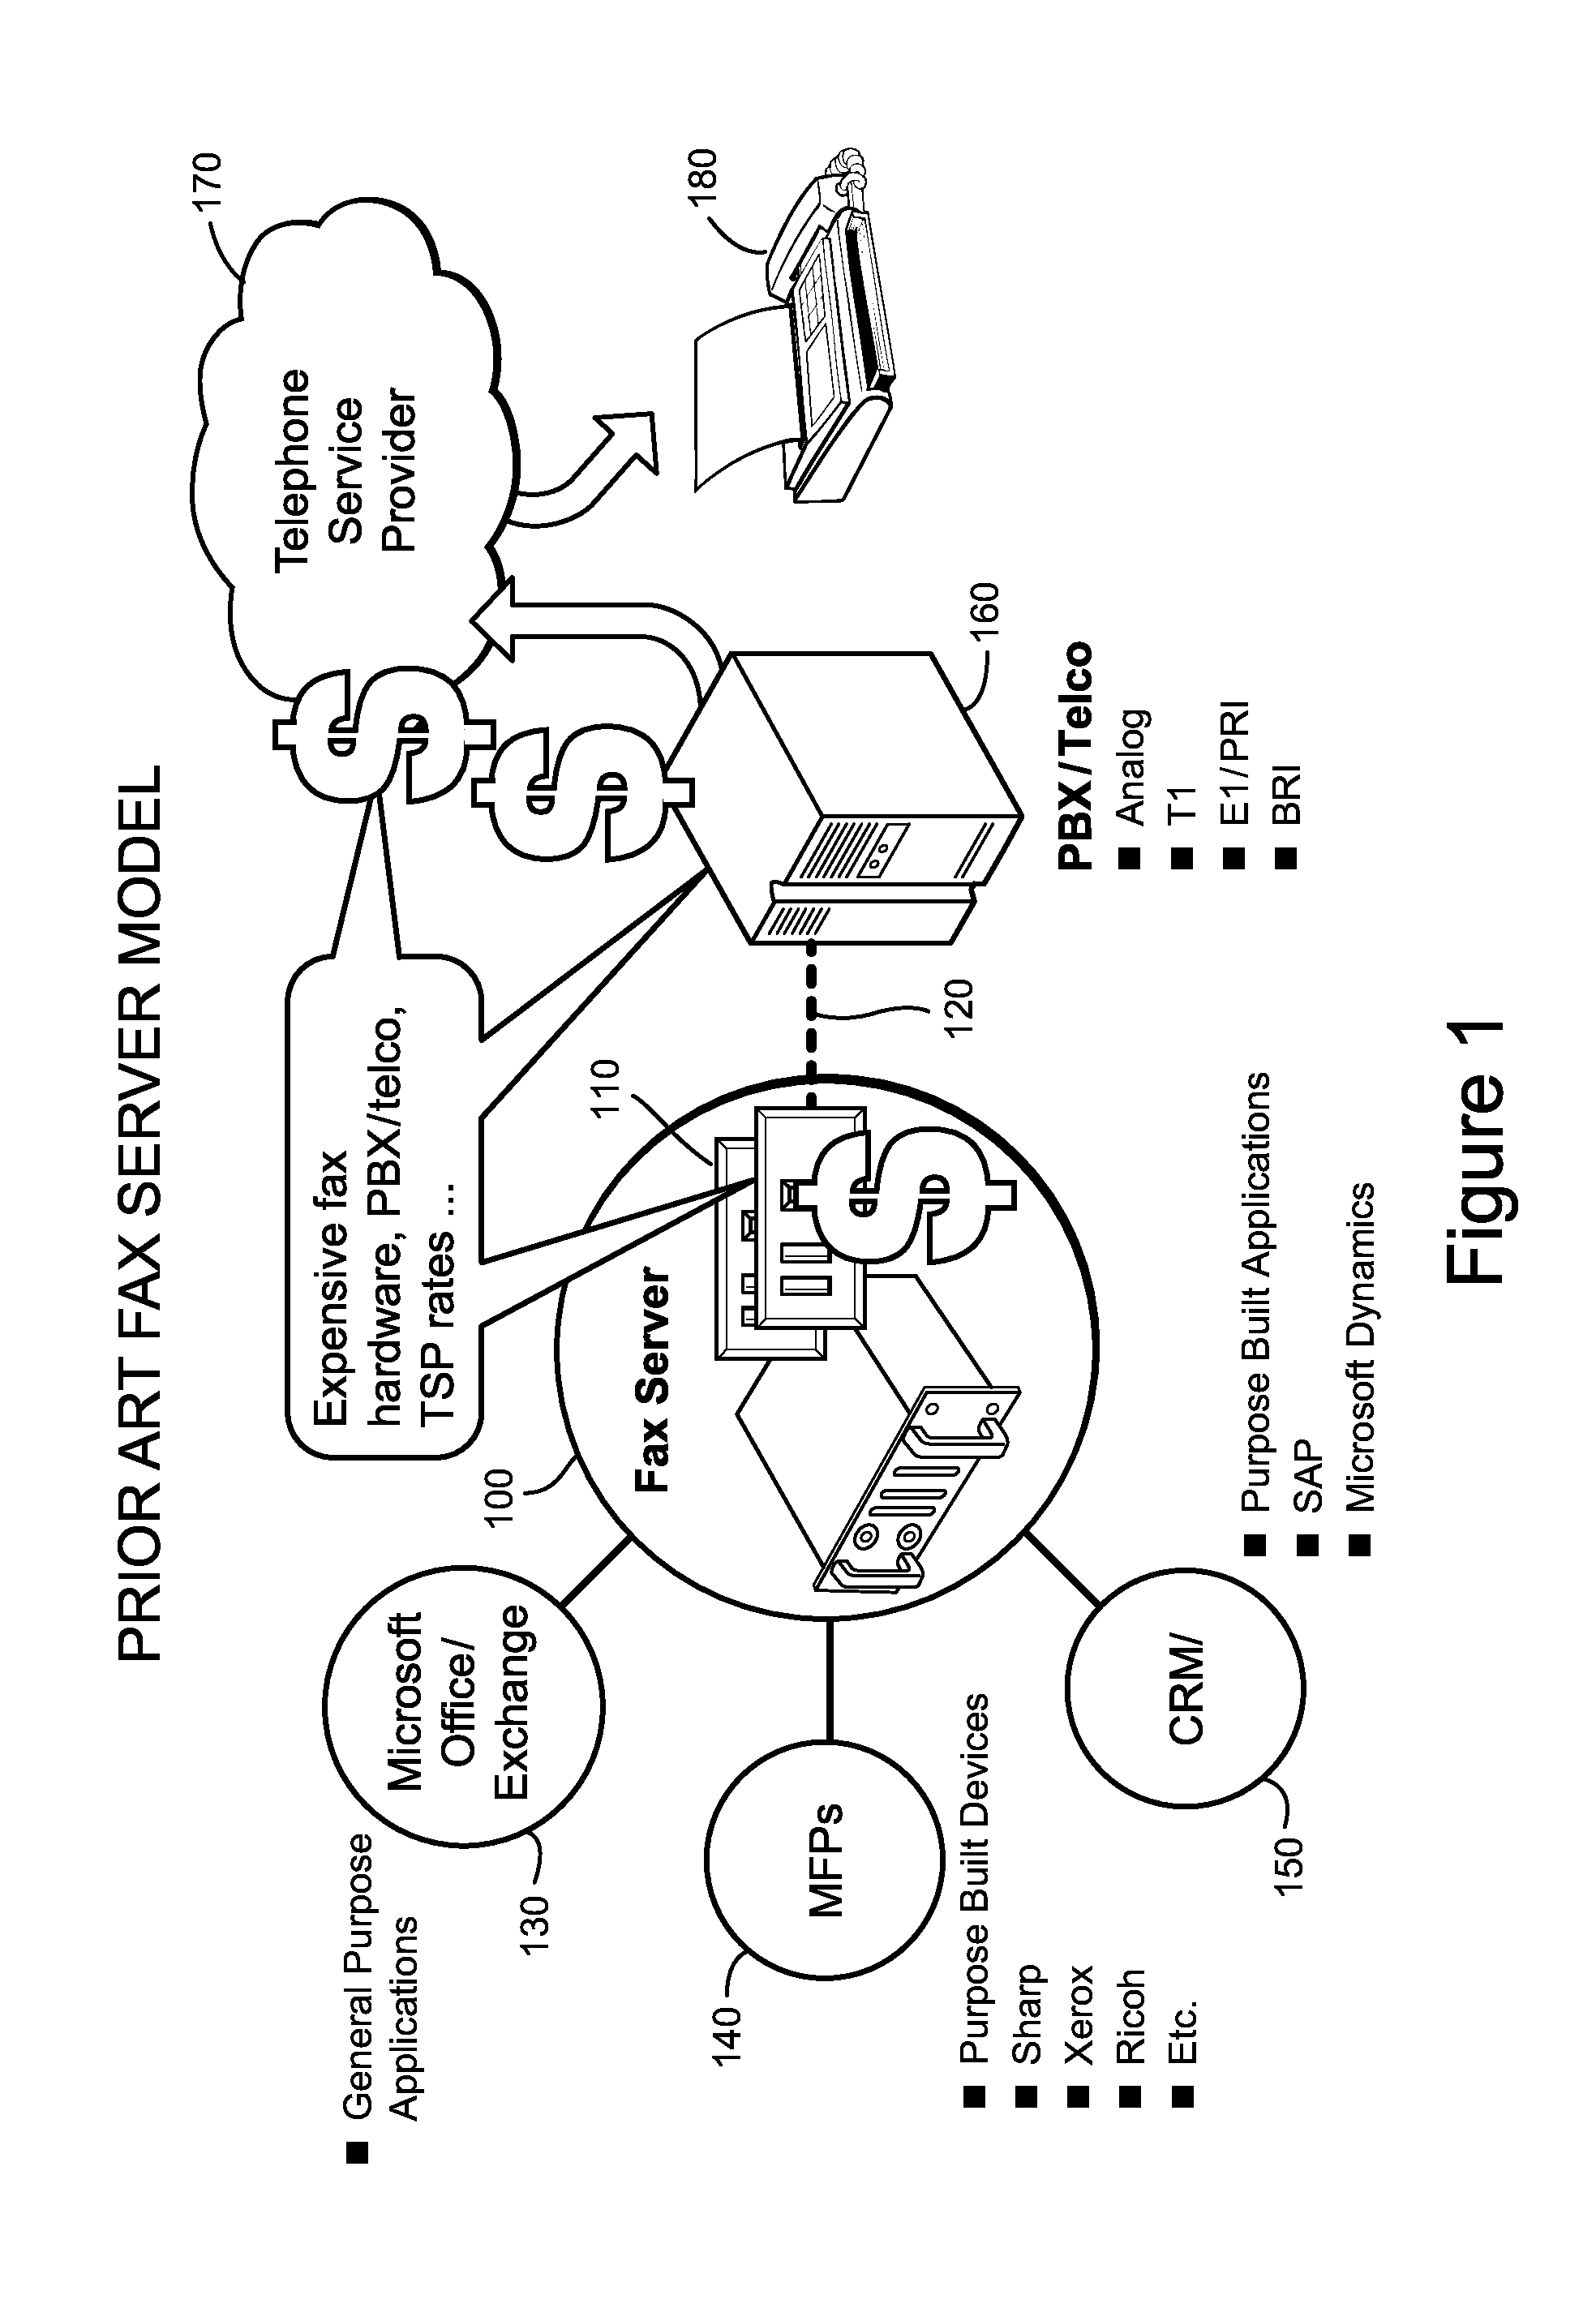 System and method of remote fax interconnect technology